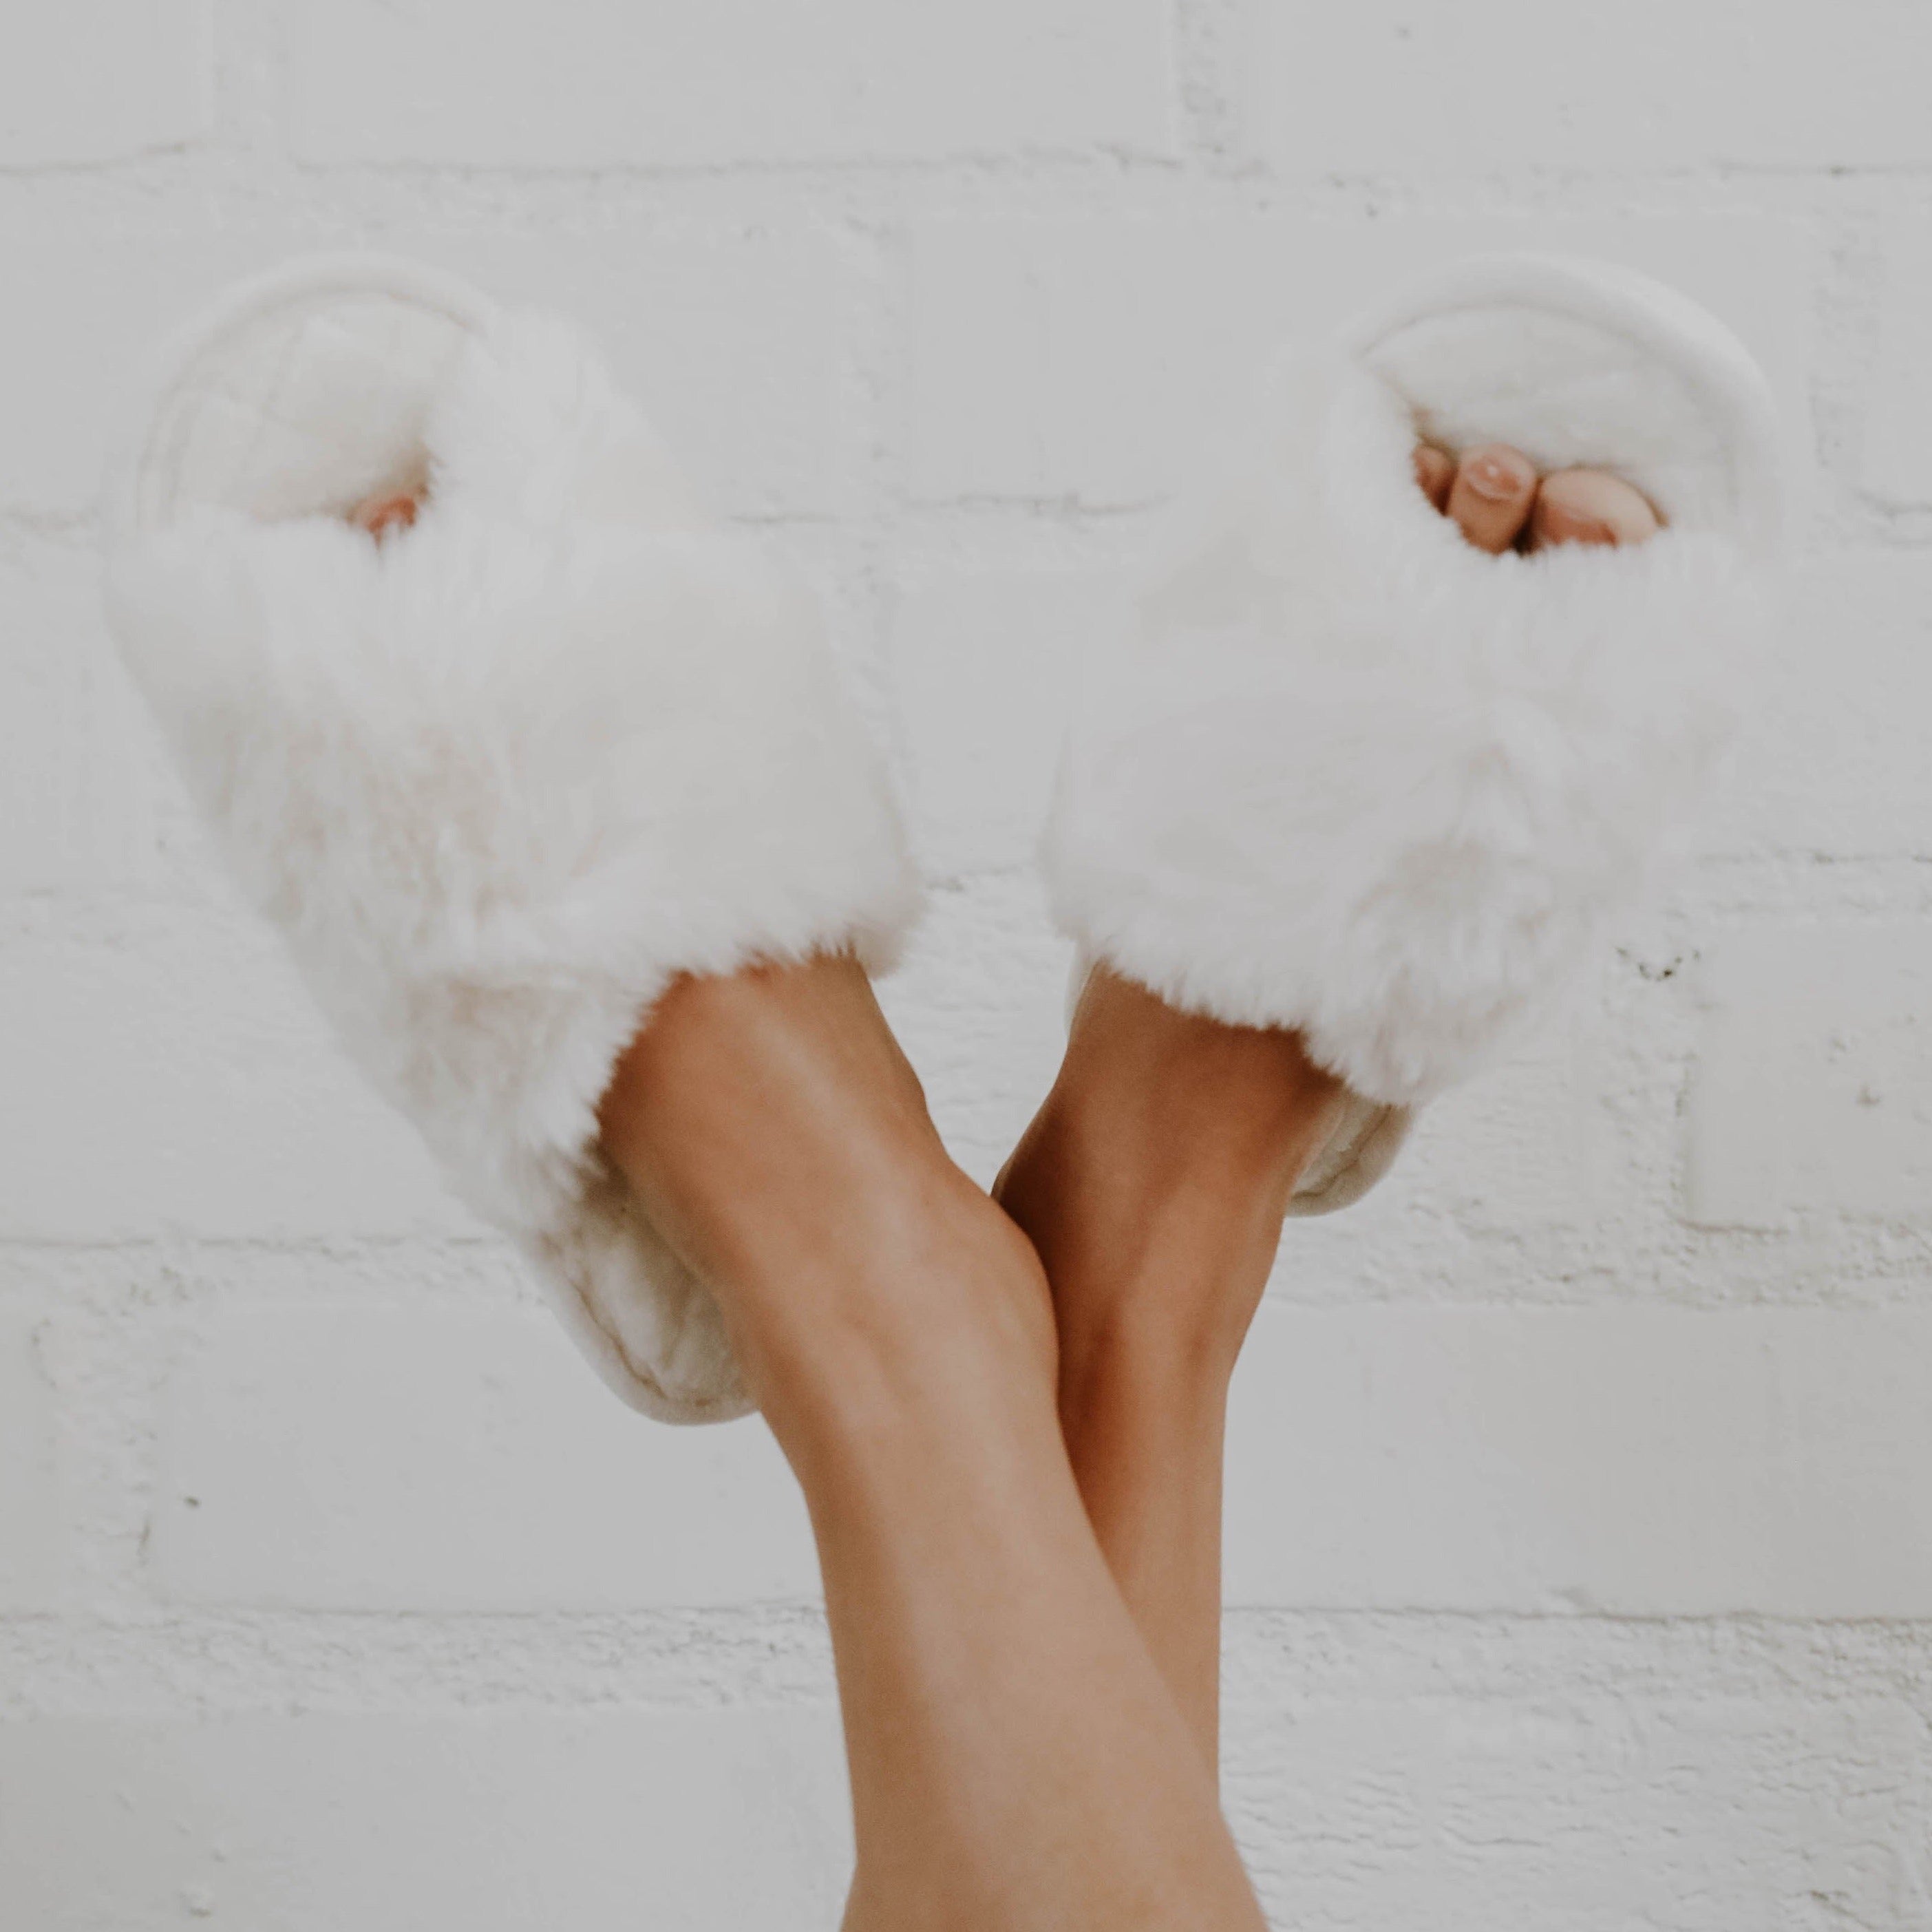 A girl crossing her legs in the air wearing white fuzzy slippers against a white background